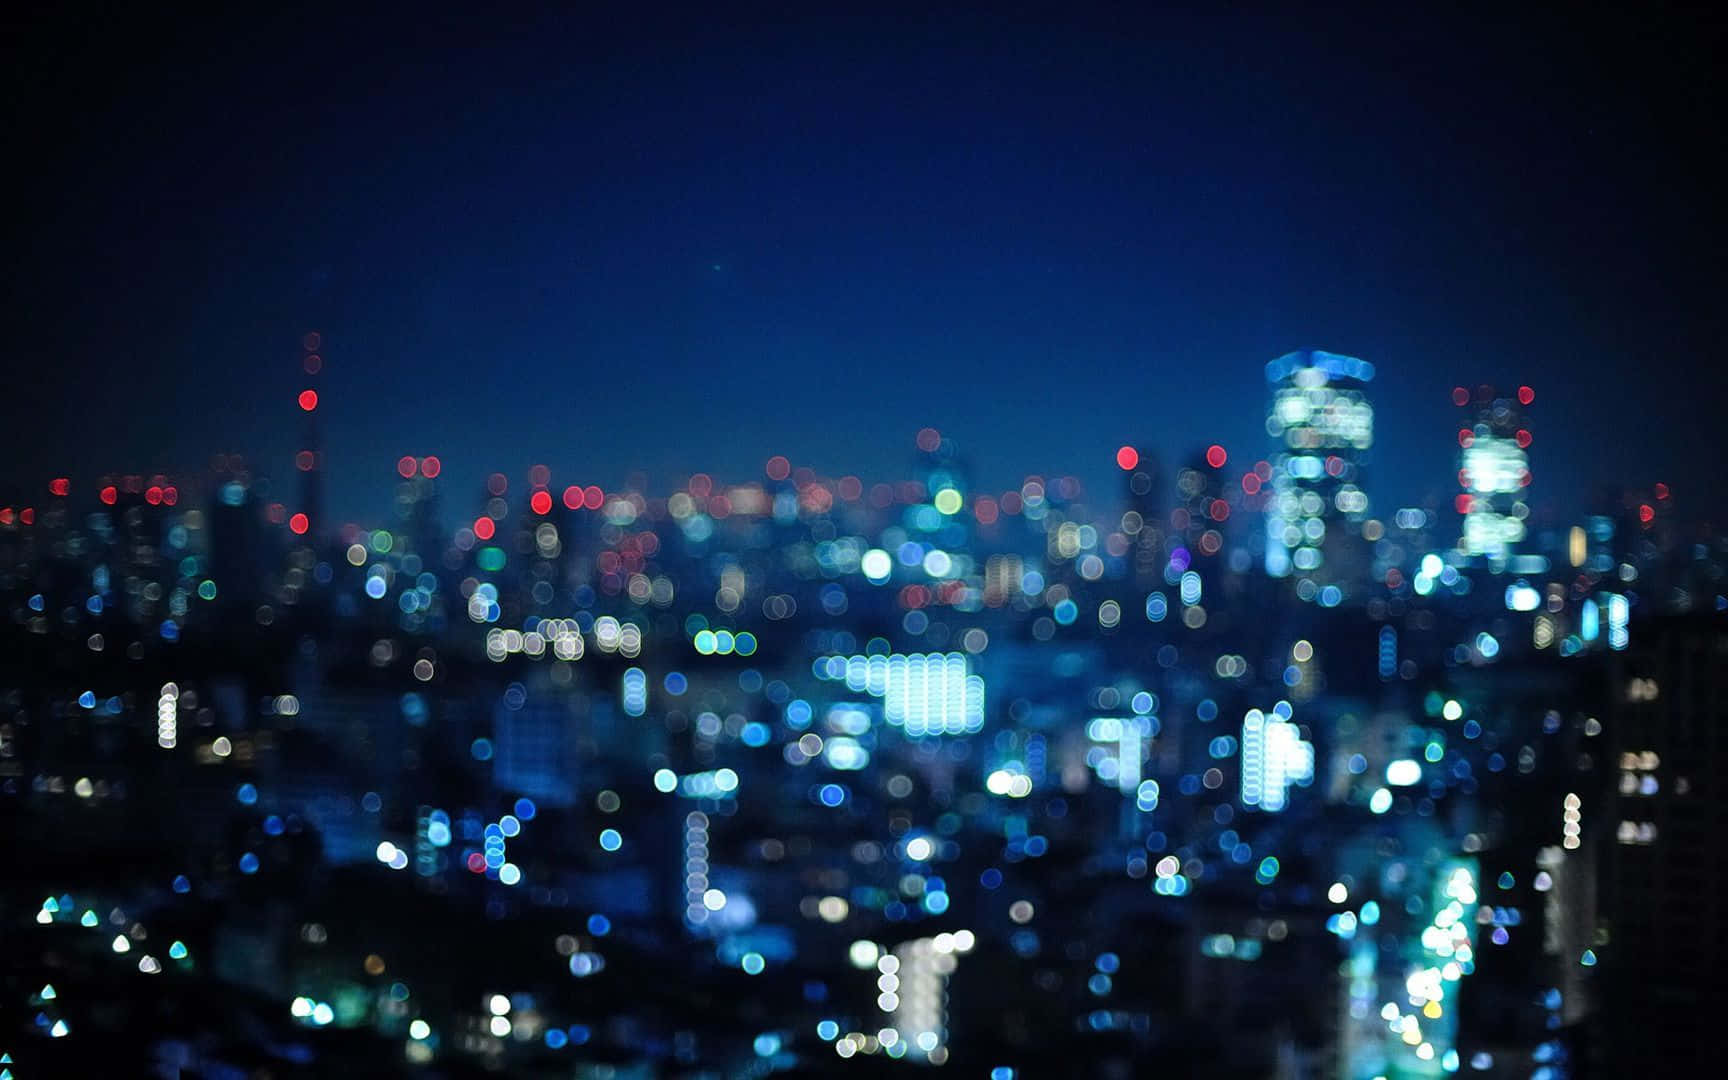 Blurry Background Bright City Lights At Nighttime 1728 x 1080 Background